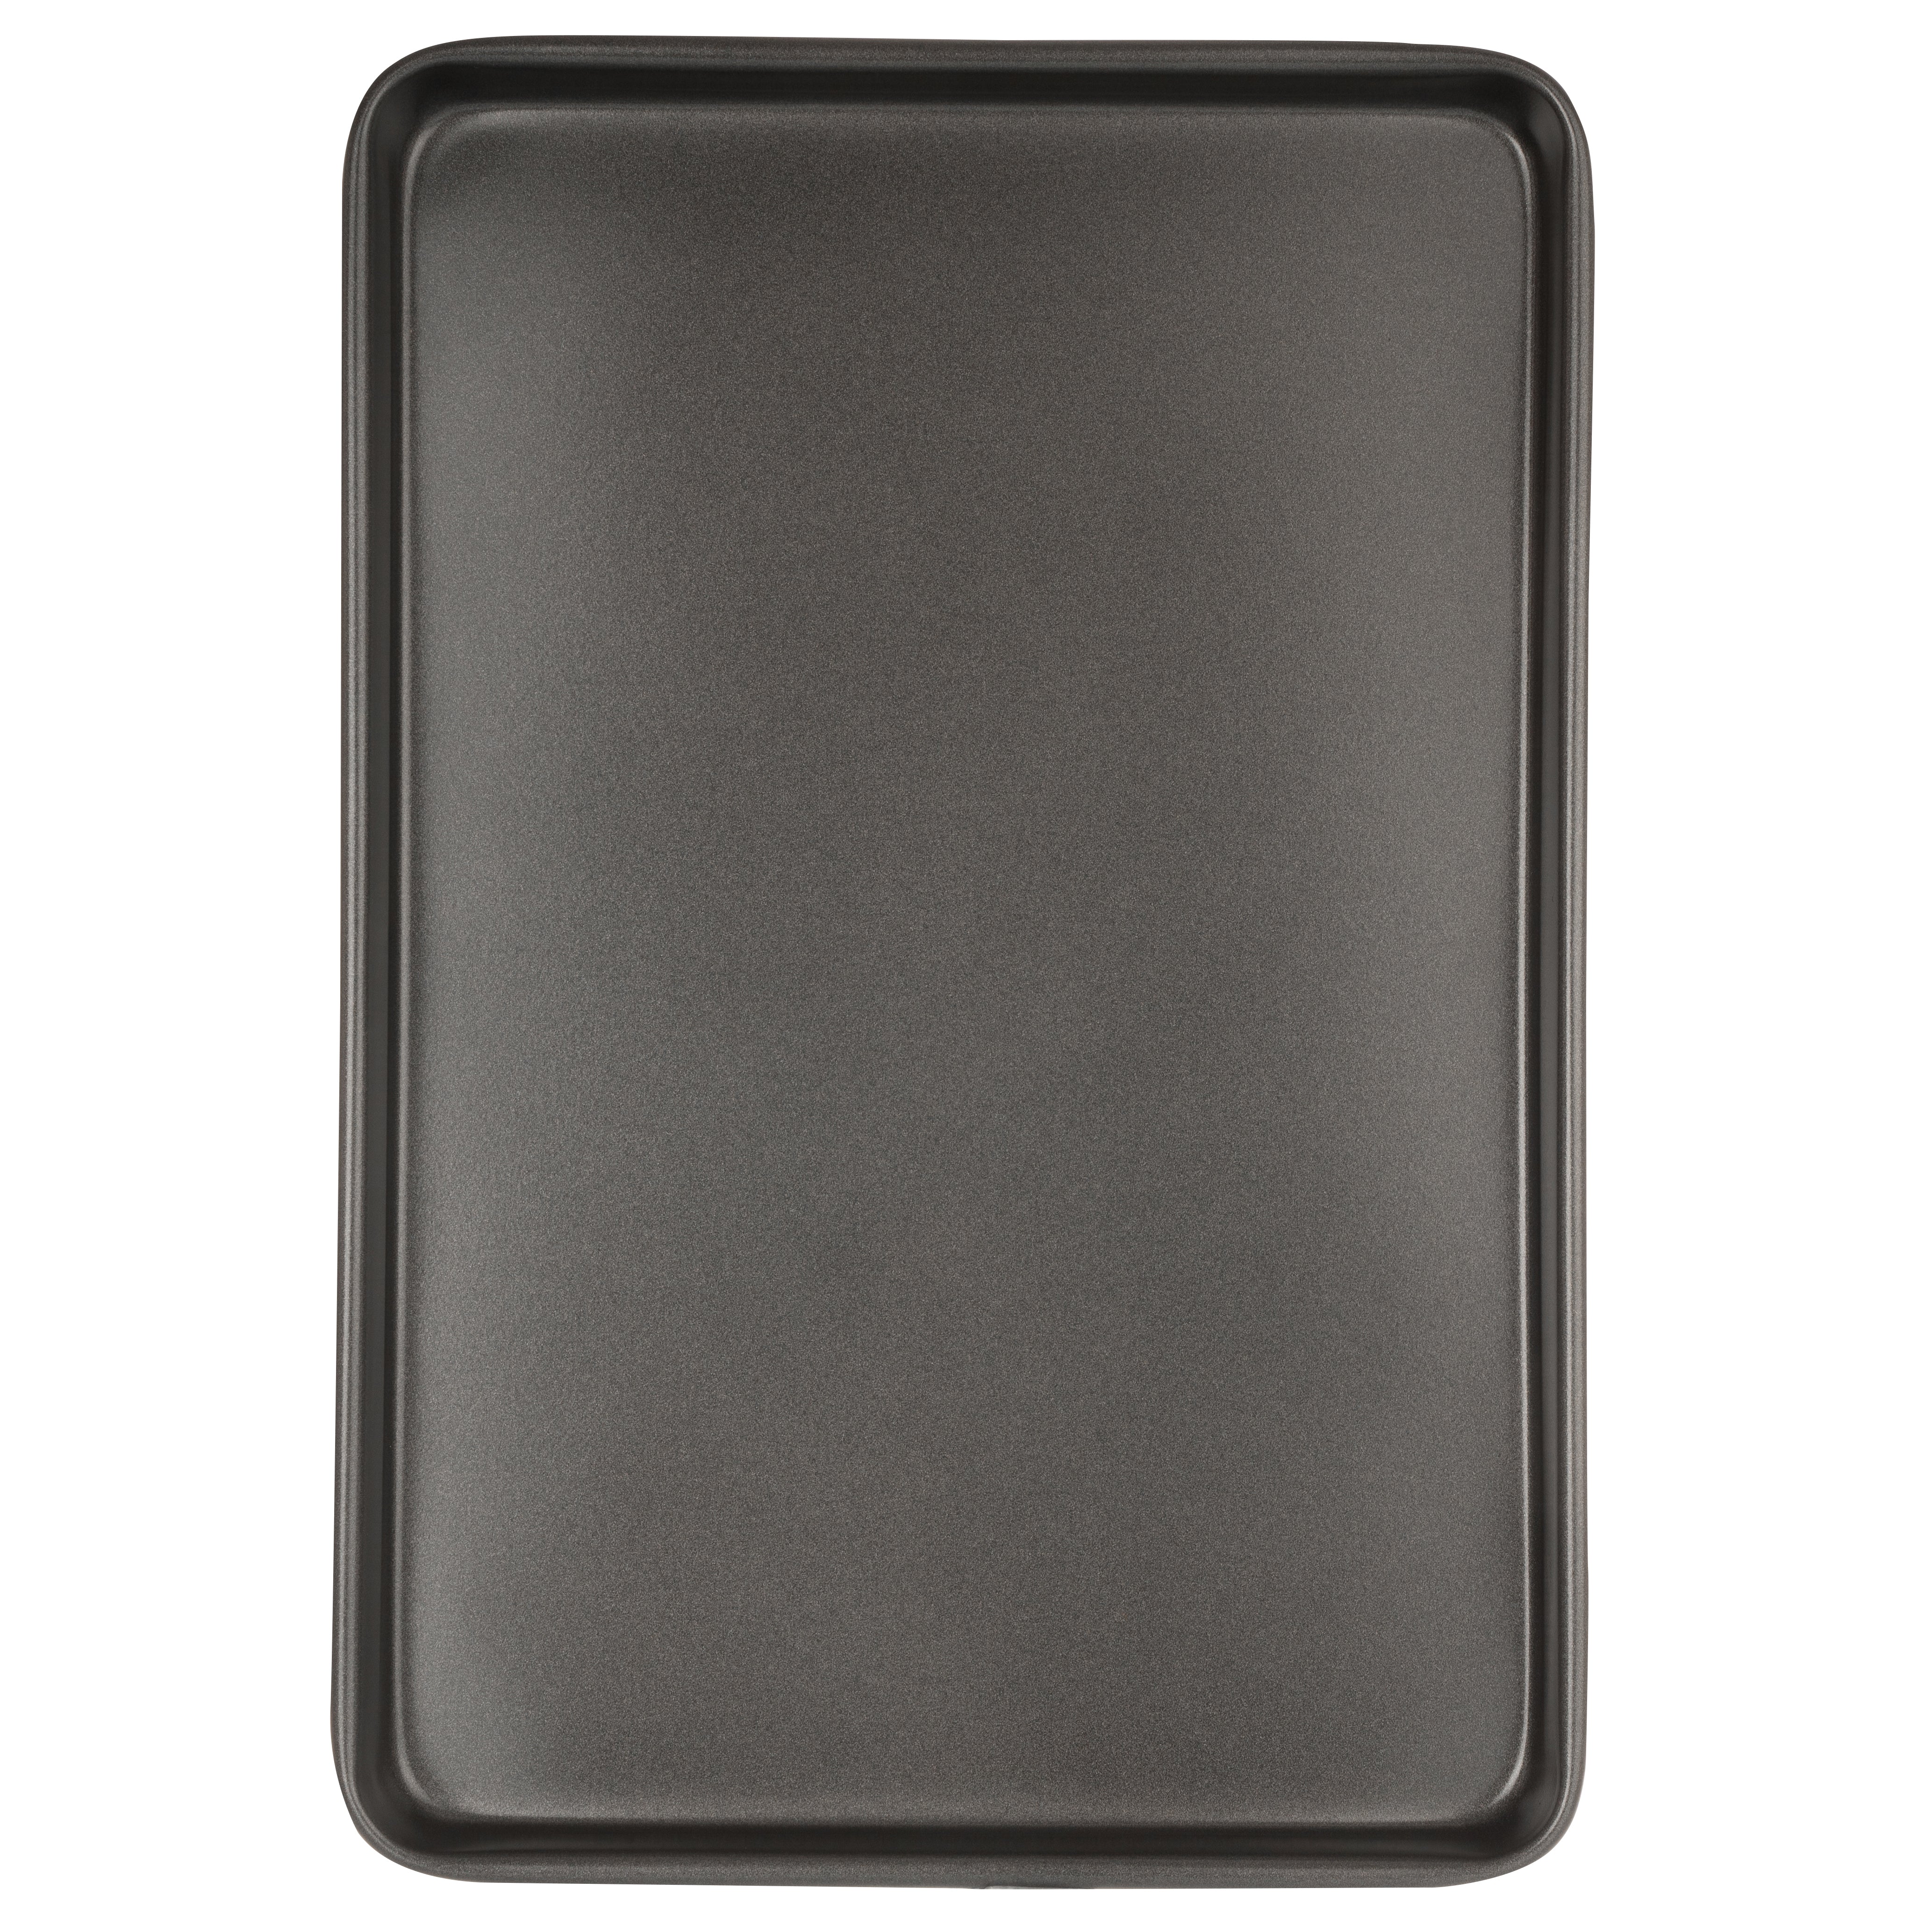 Luxe Kitchen Professional Quality Oven Baking Tray 34.5cm x 24.5cm x 2.5cm - The Cooks Cupboard Ltd